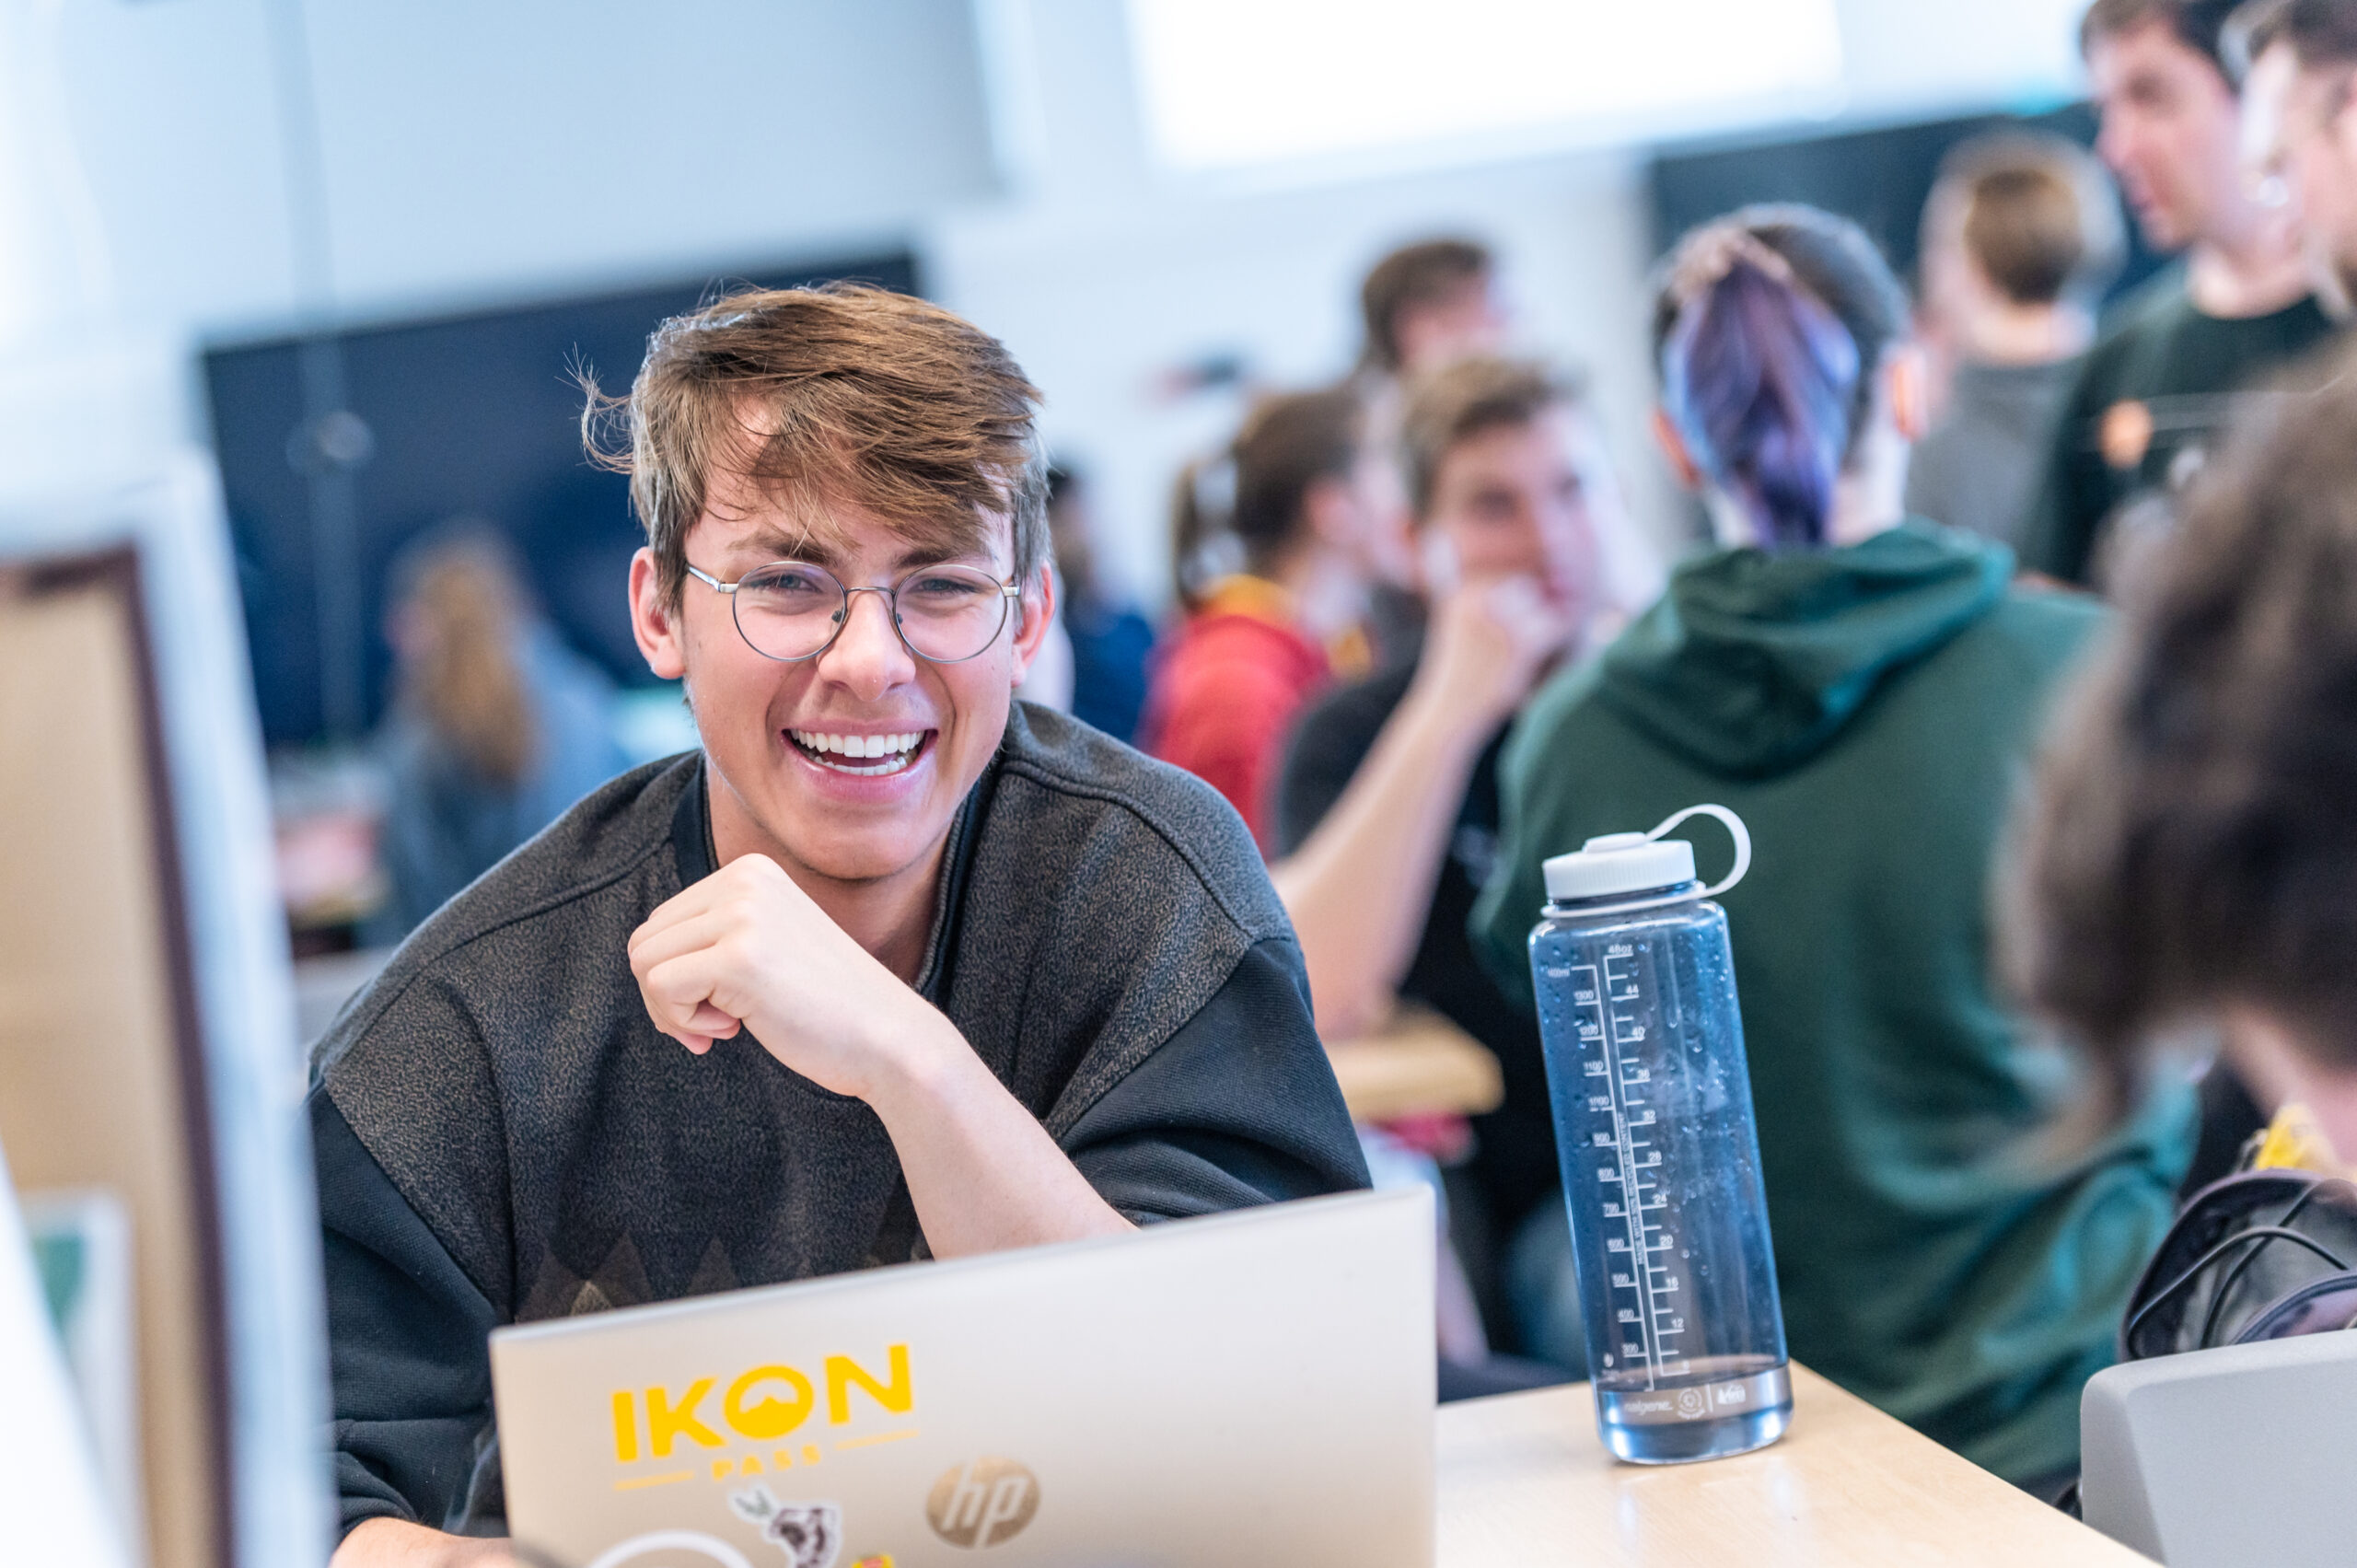 Student smiling while in class